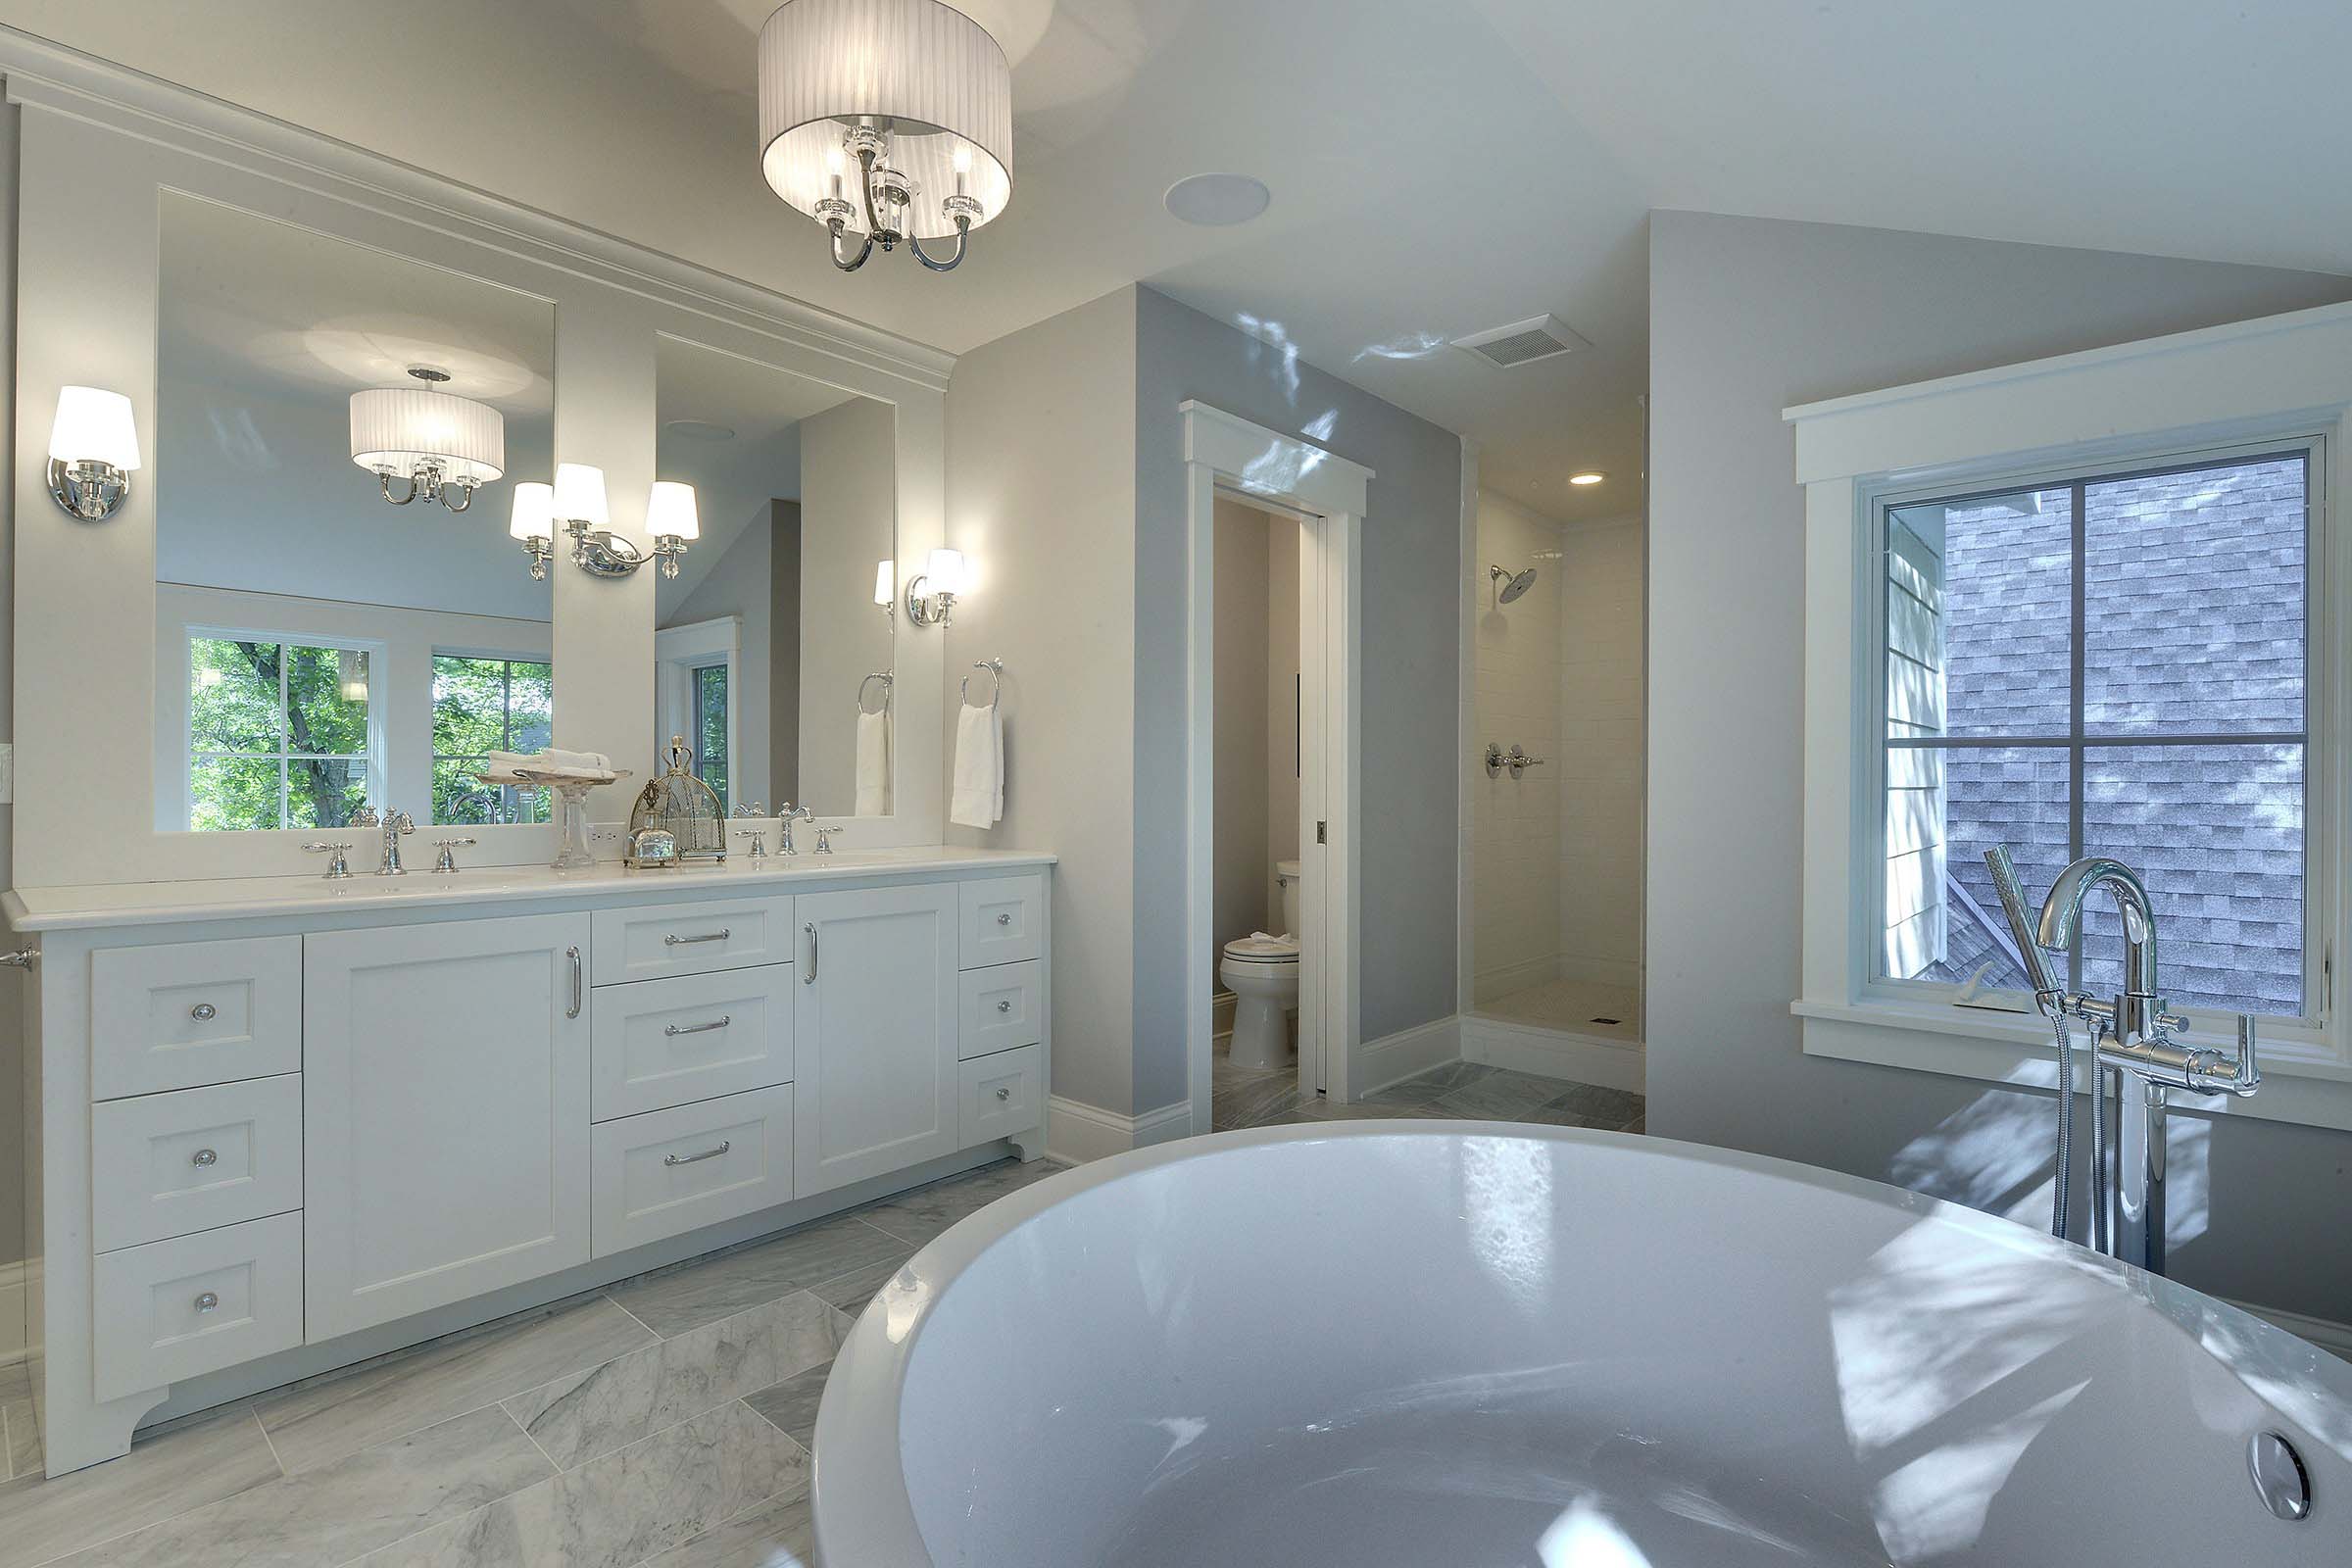 A white bathroom with a large tub and sink.